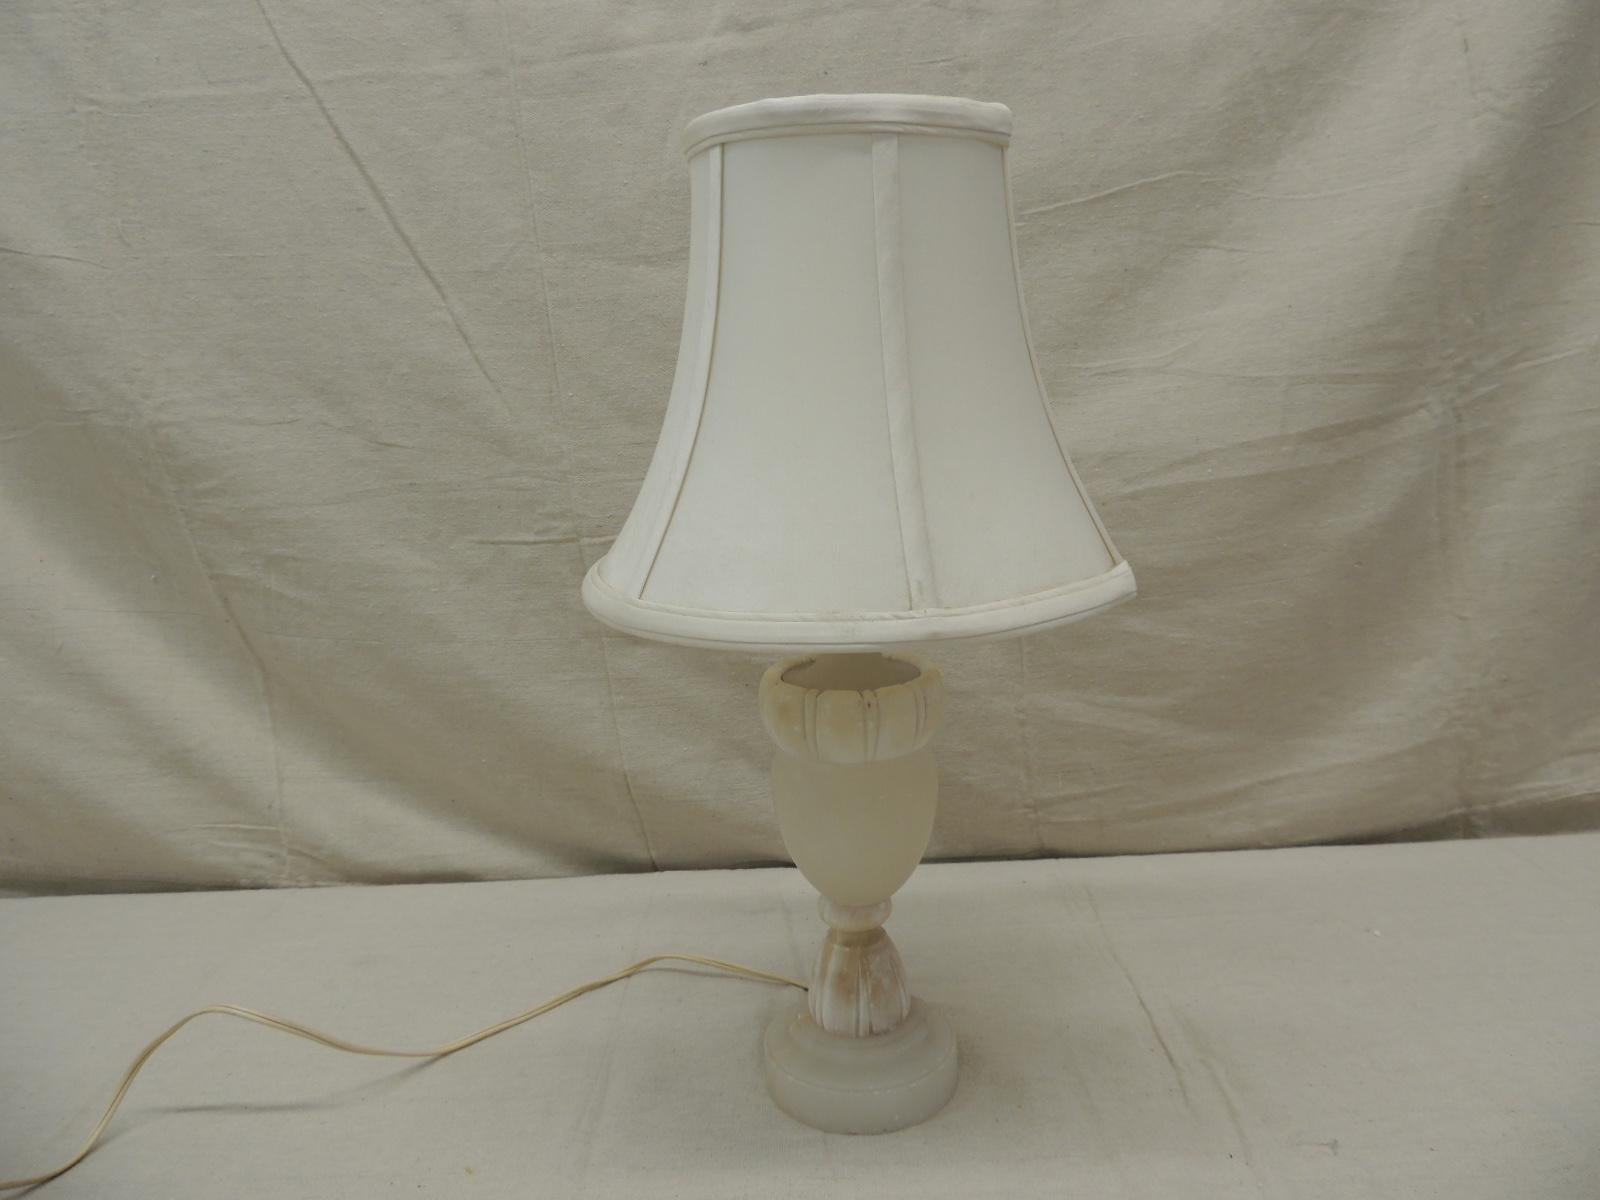 Vintage Petite Alabaster table lamp with silk shade
Size: 19.25